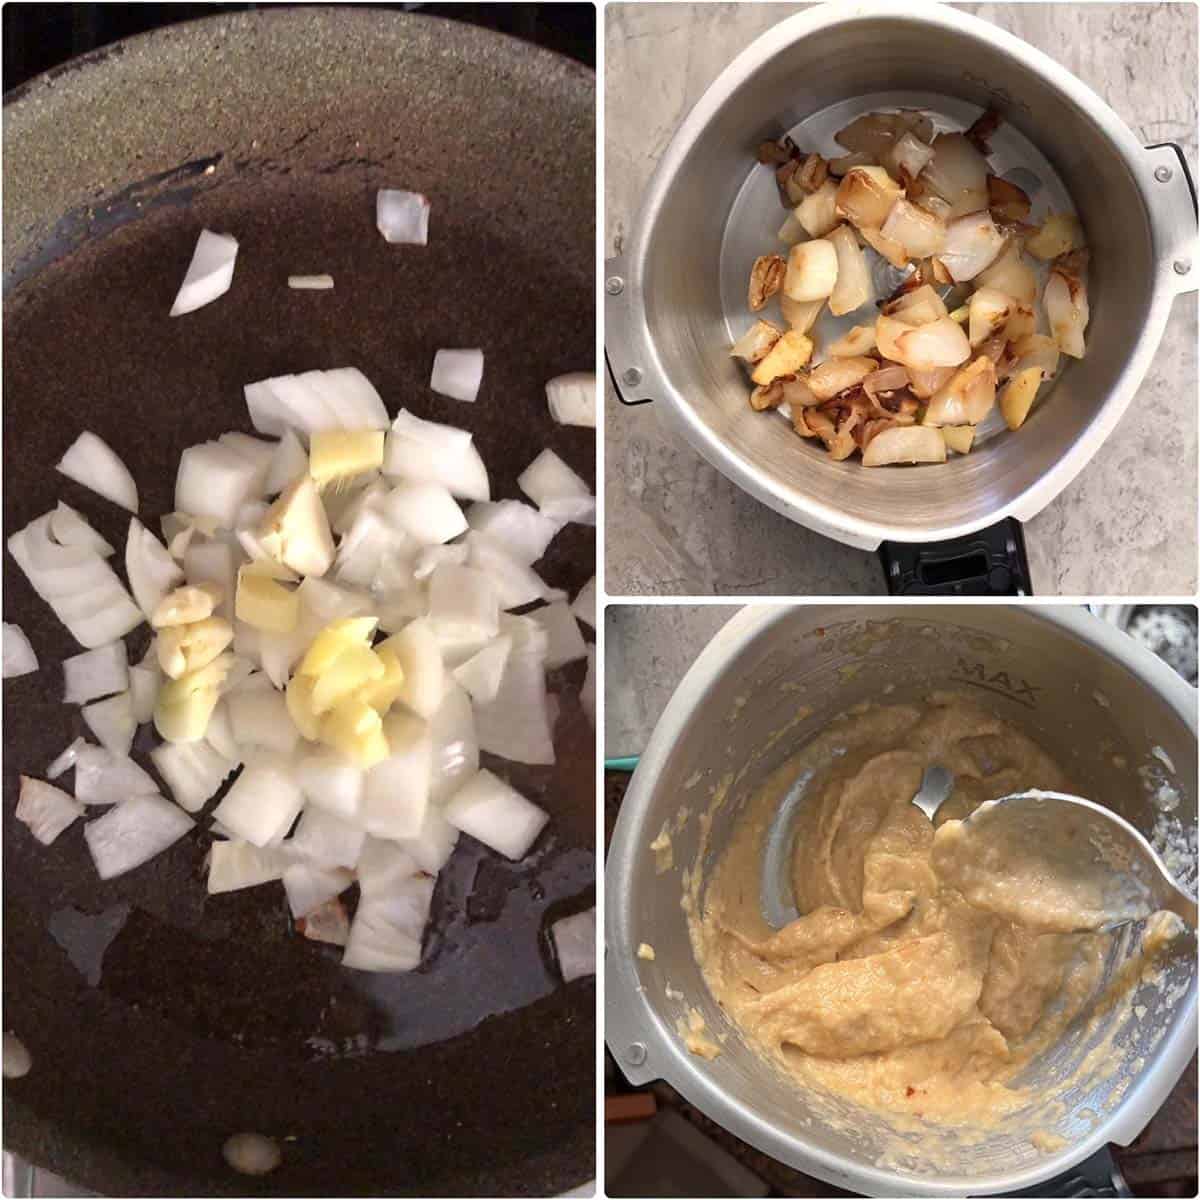 Step by step photos showing browned dry grated coconut and onions